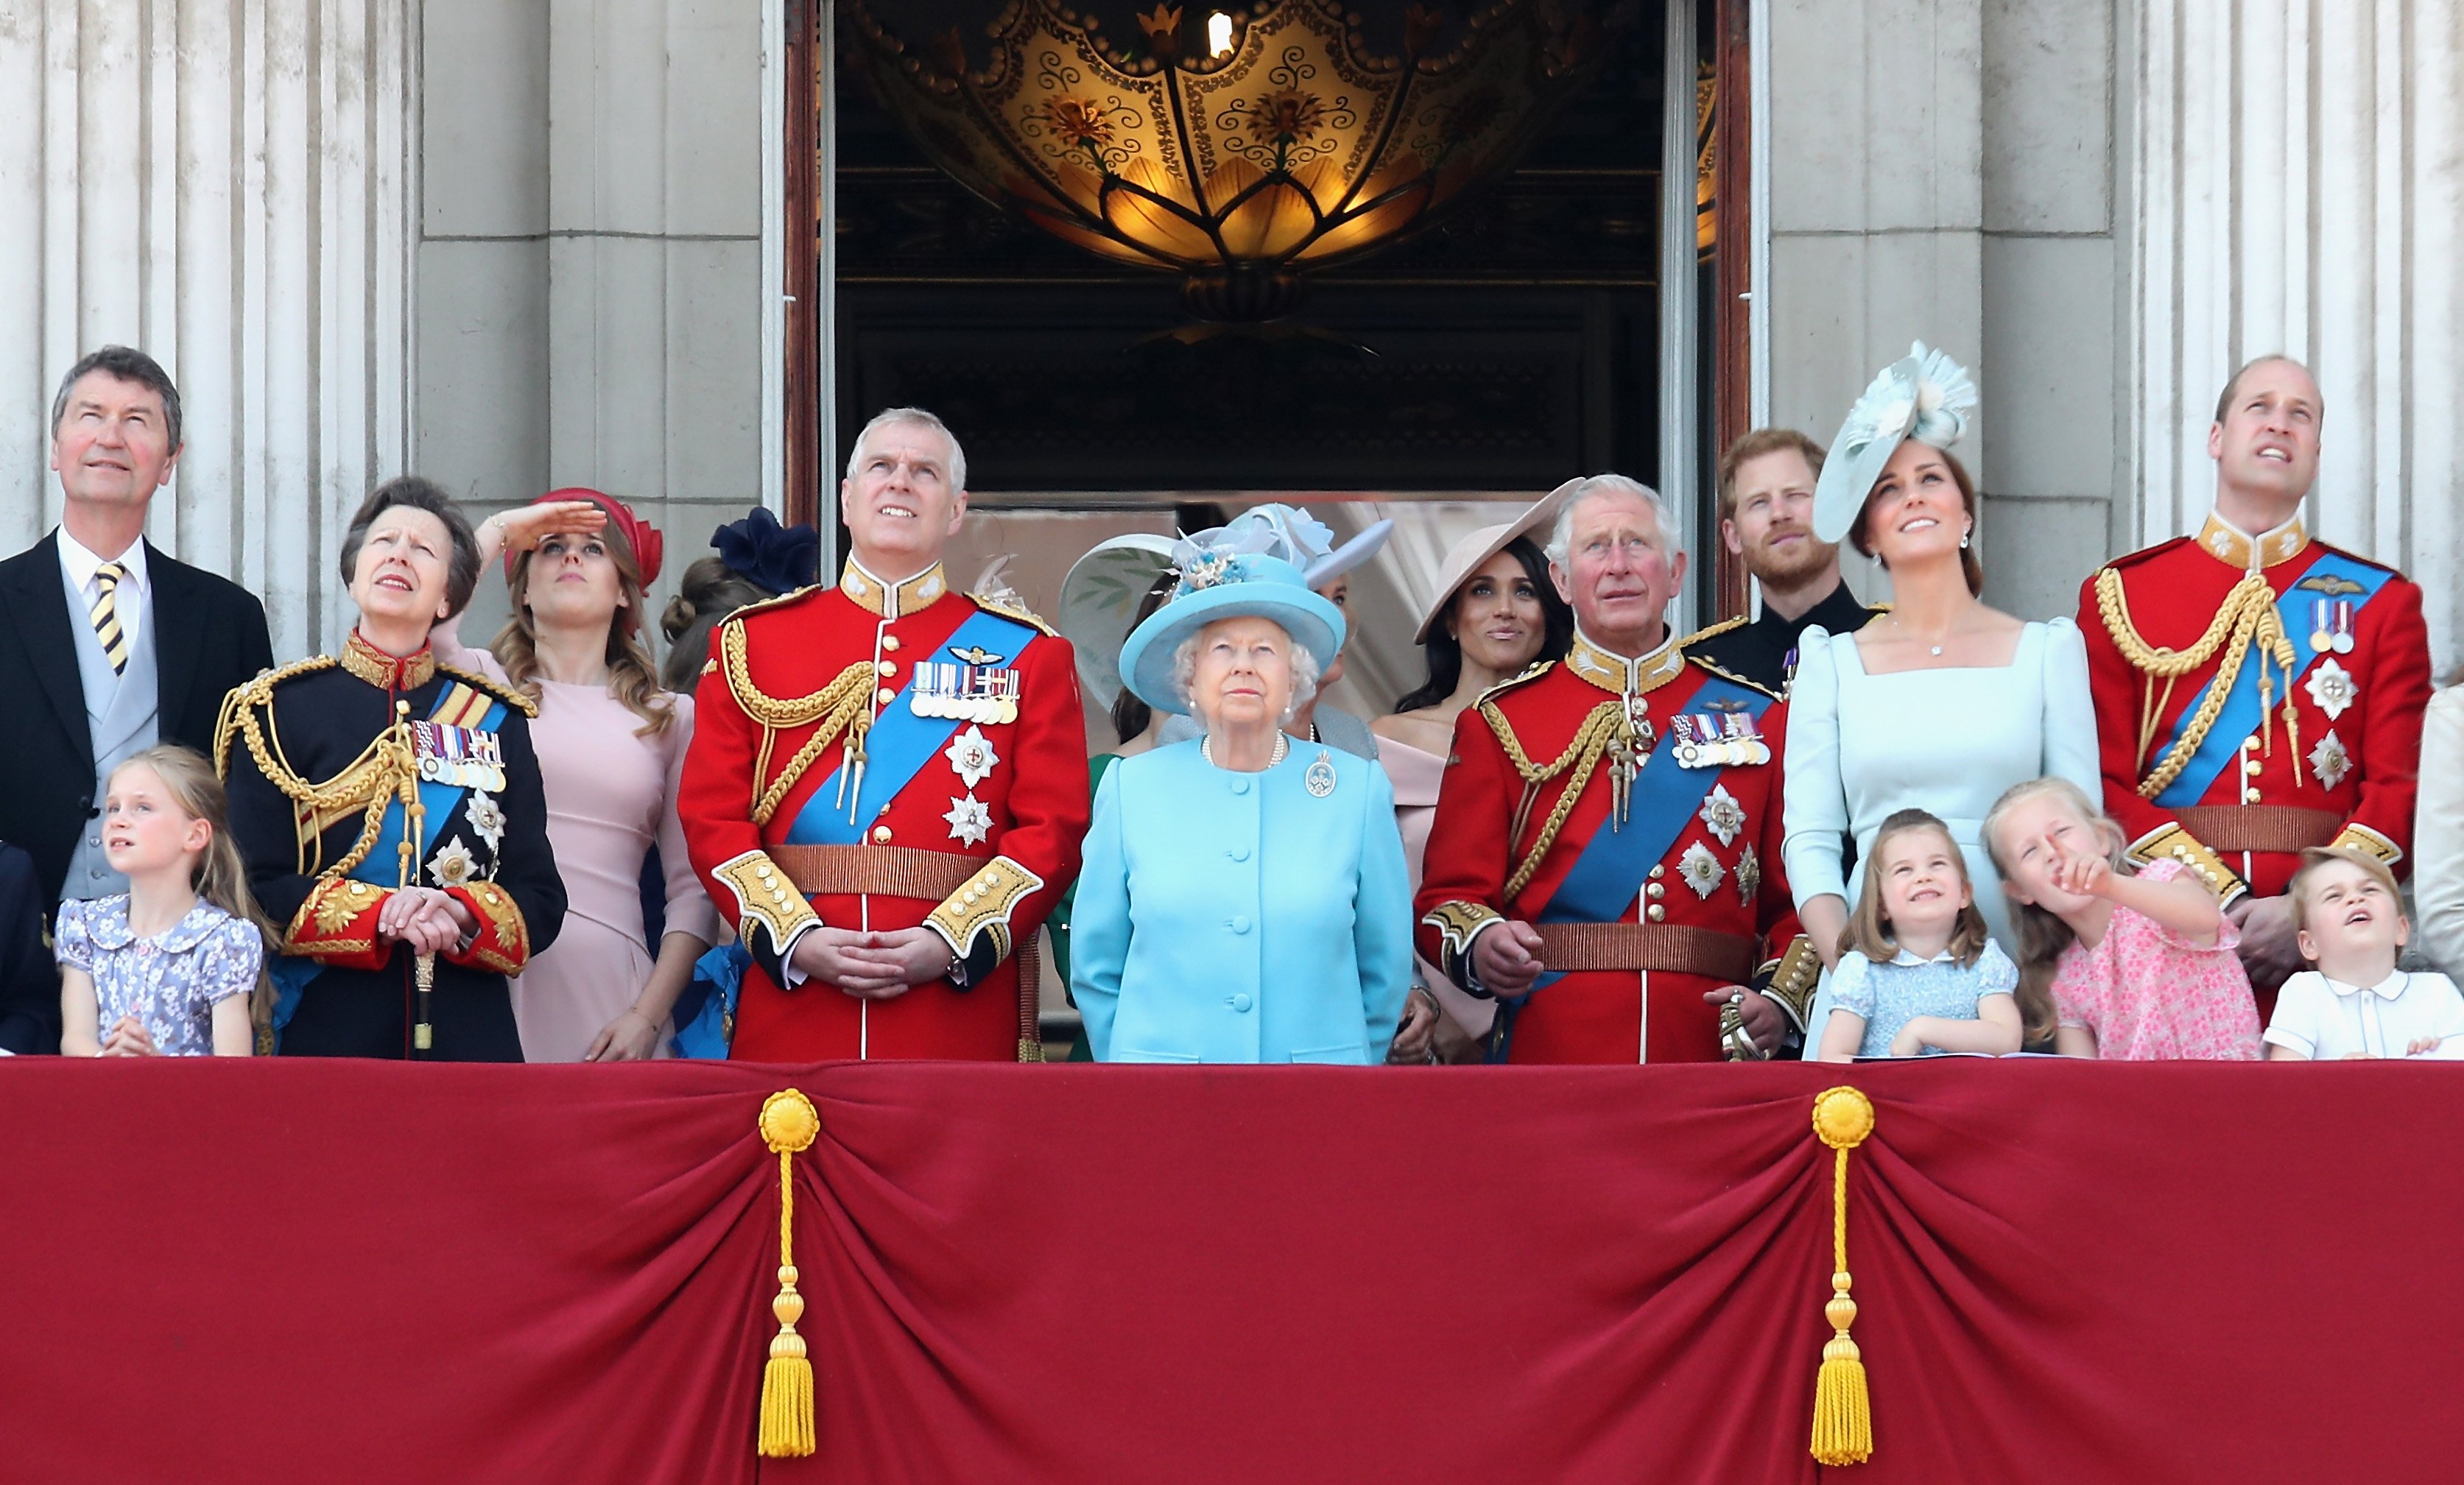 The Royal Family watch the flypast on the balcony of Buckingham Palace during Trooping The Colour on June 9, 2018 | Photo: GettyImages